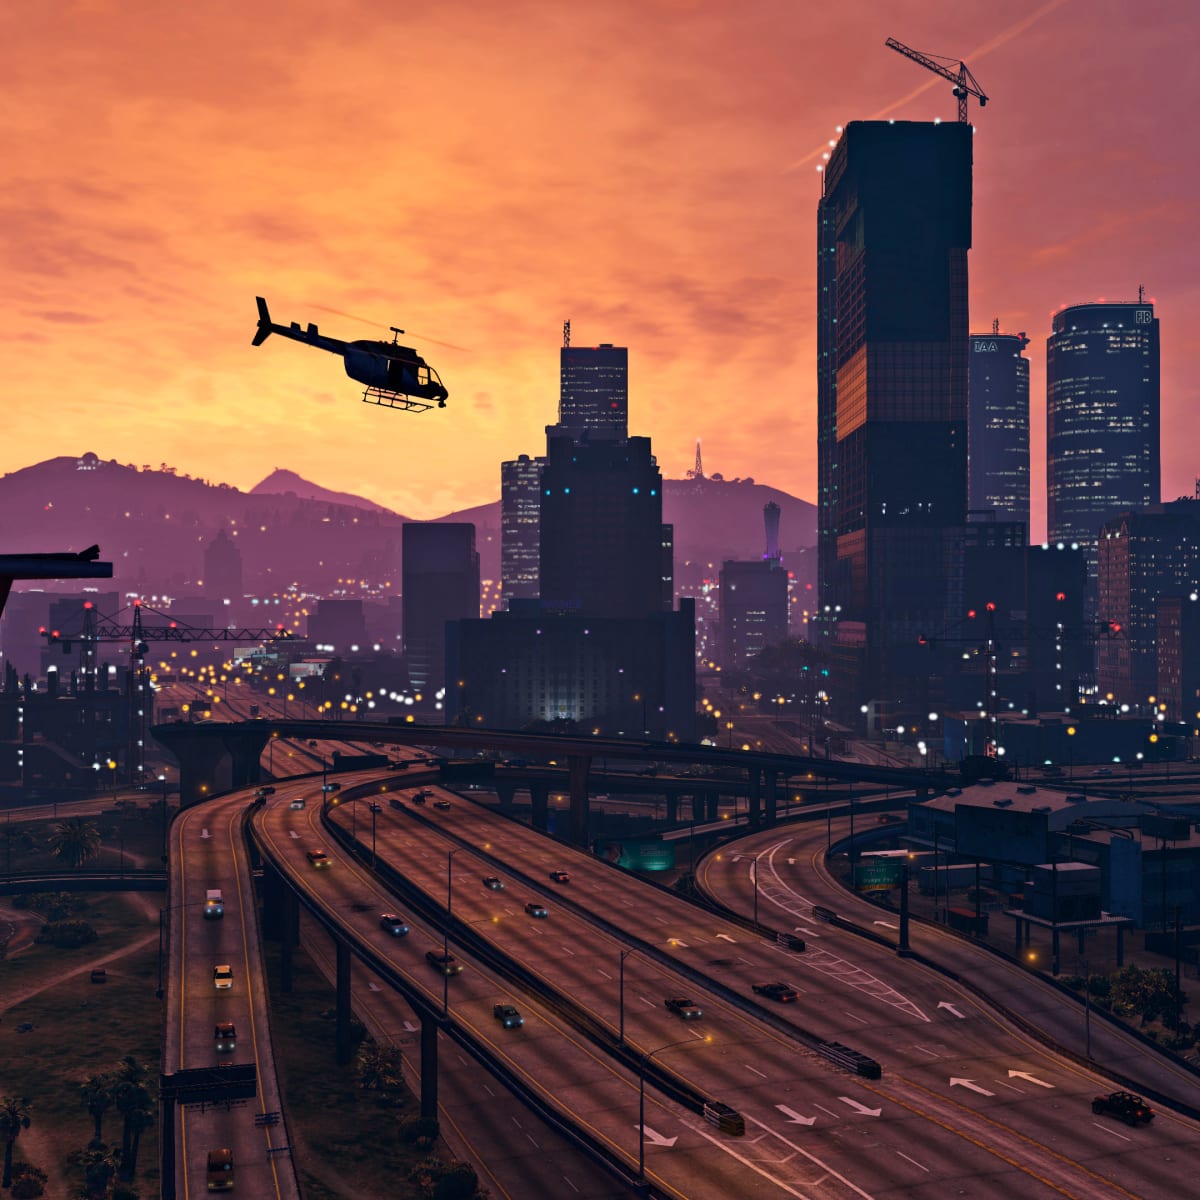 GTA 6 Trailer to be released in December 2023, confirms Rockstar Games